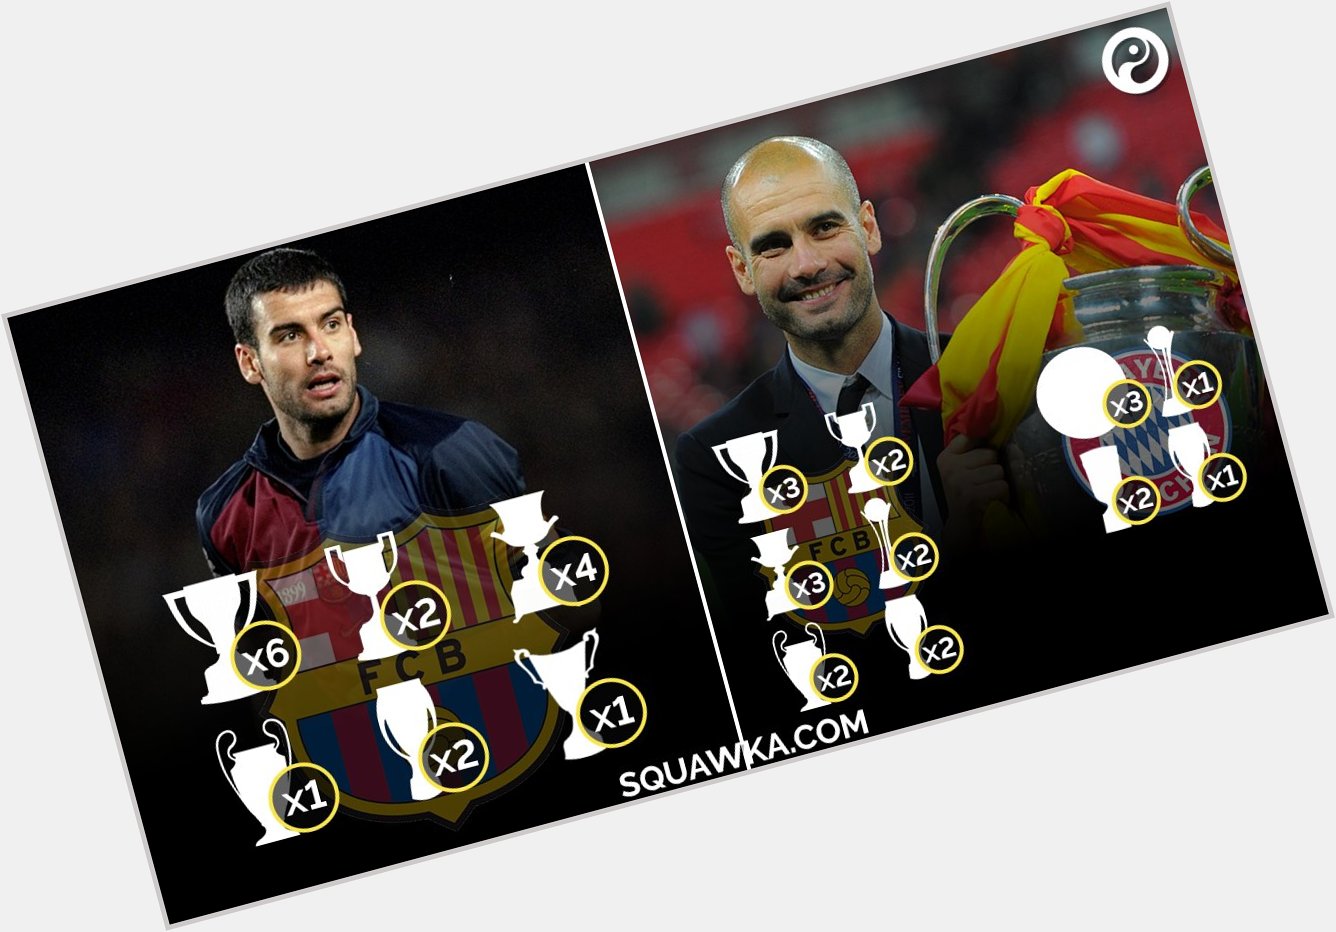 Happy 46th birthday to Pep Guardiola.

He\s won a fair few things as both a player and a manager 